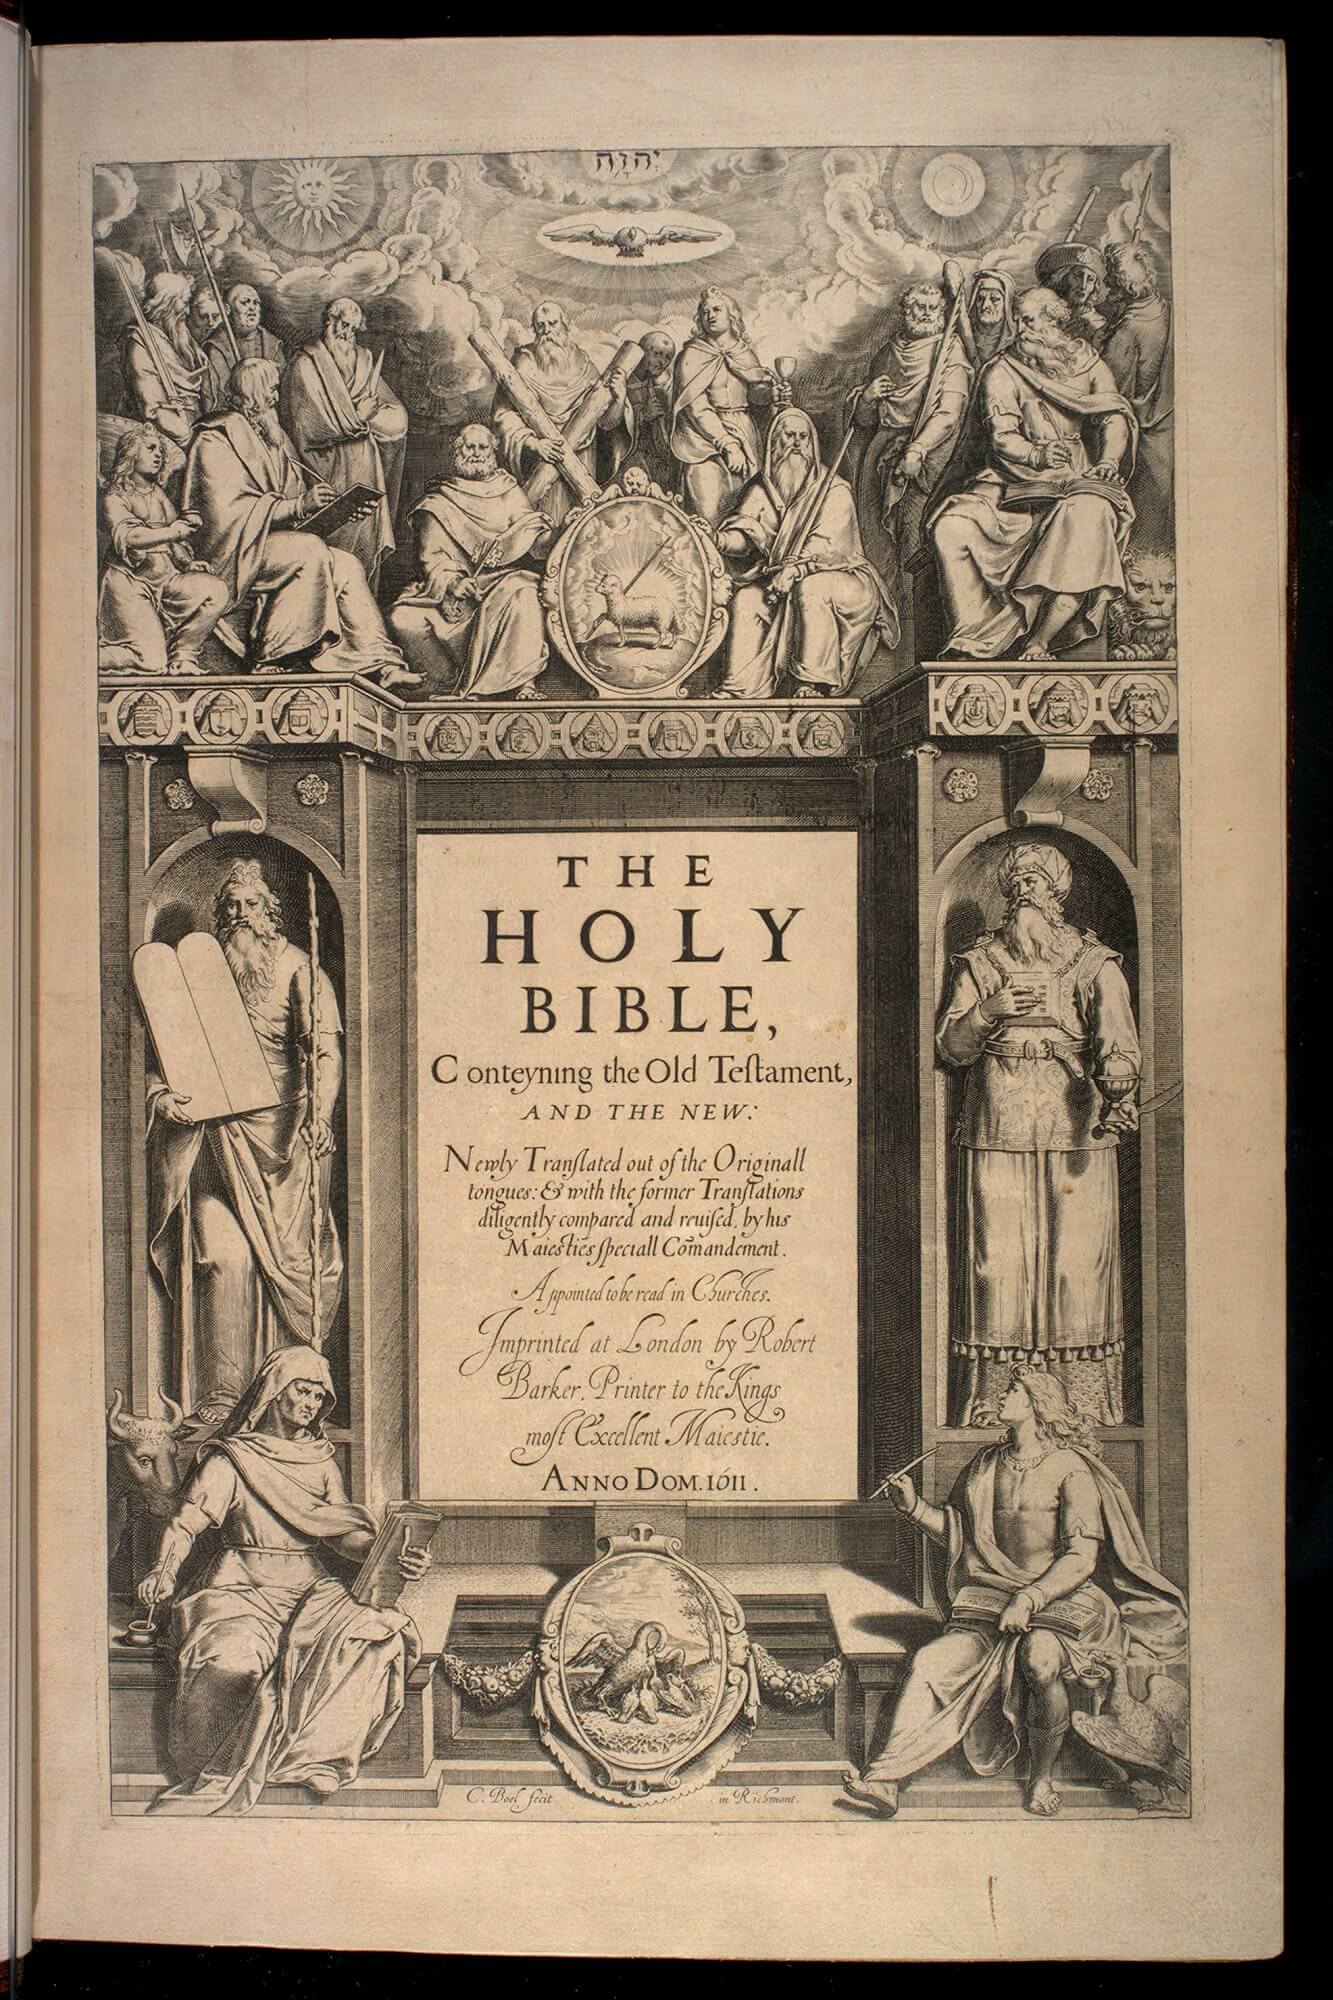 The title page for the Authorized version of the Bible is completely engraved, including the title and imprint information, by Cornelius Boel, whose name appears in the bottom left of the image. (This version is more commonly known as the King James Bible, since James authorized it to be translated and placed in all churches.)